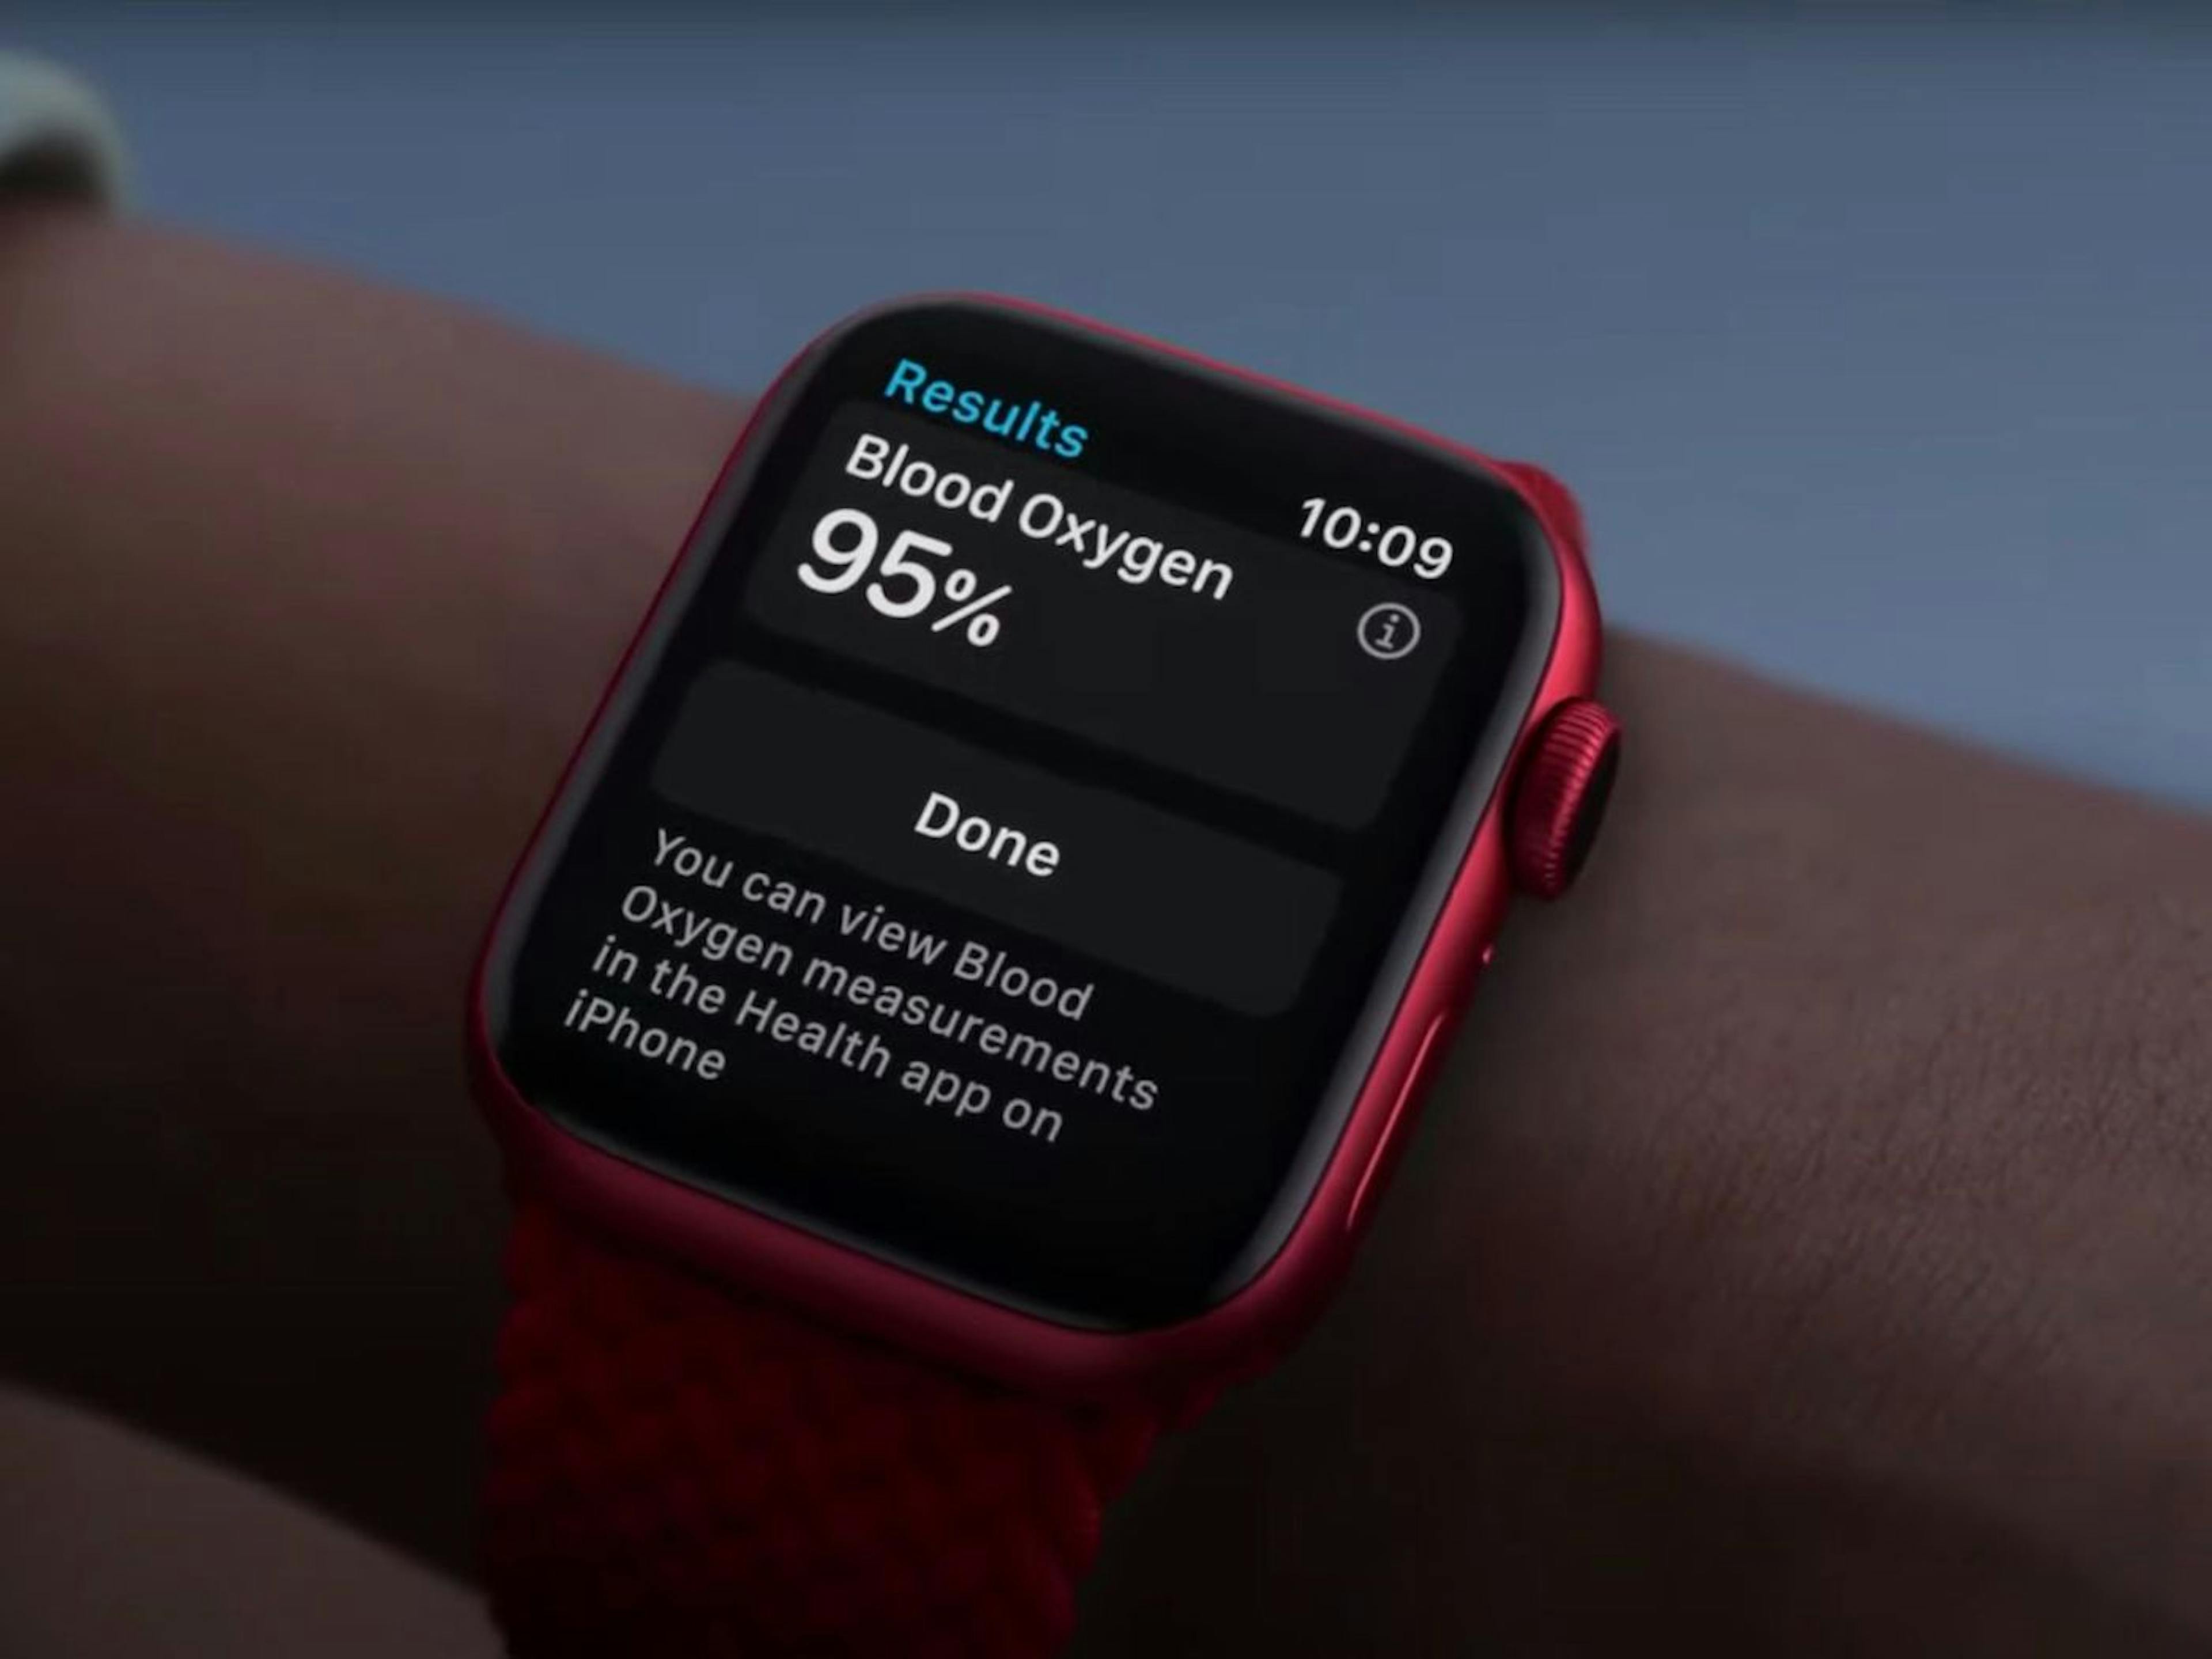 featured image - The Apple Watch’s Blood Oxygen Feature Faces Racial Bias Accusations